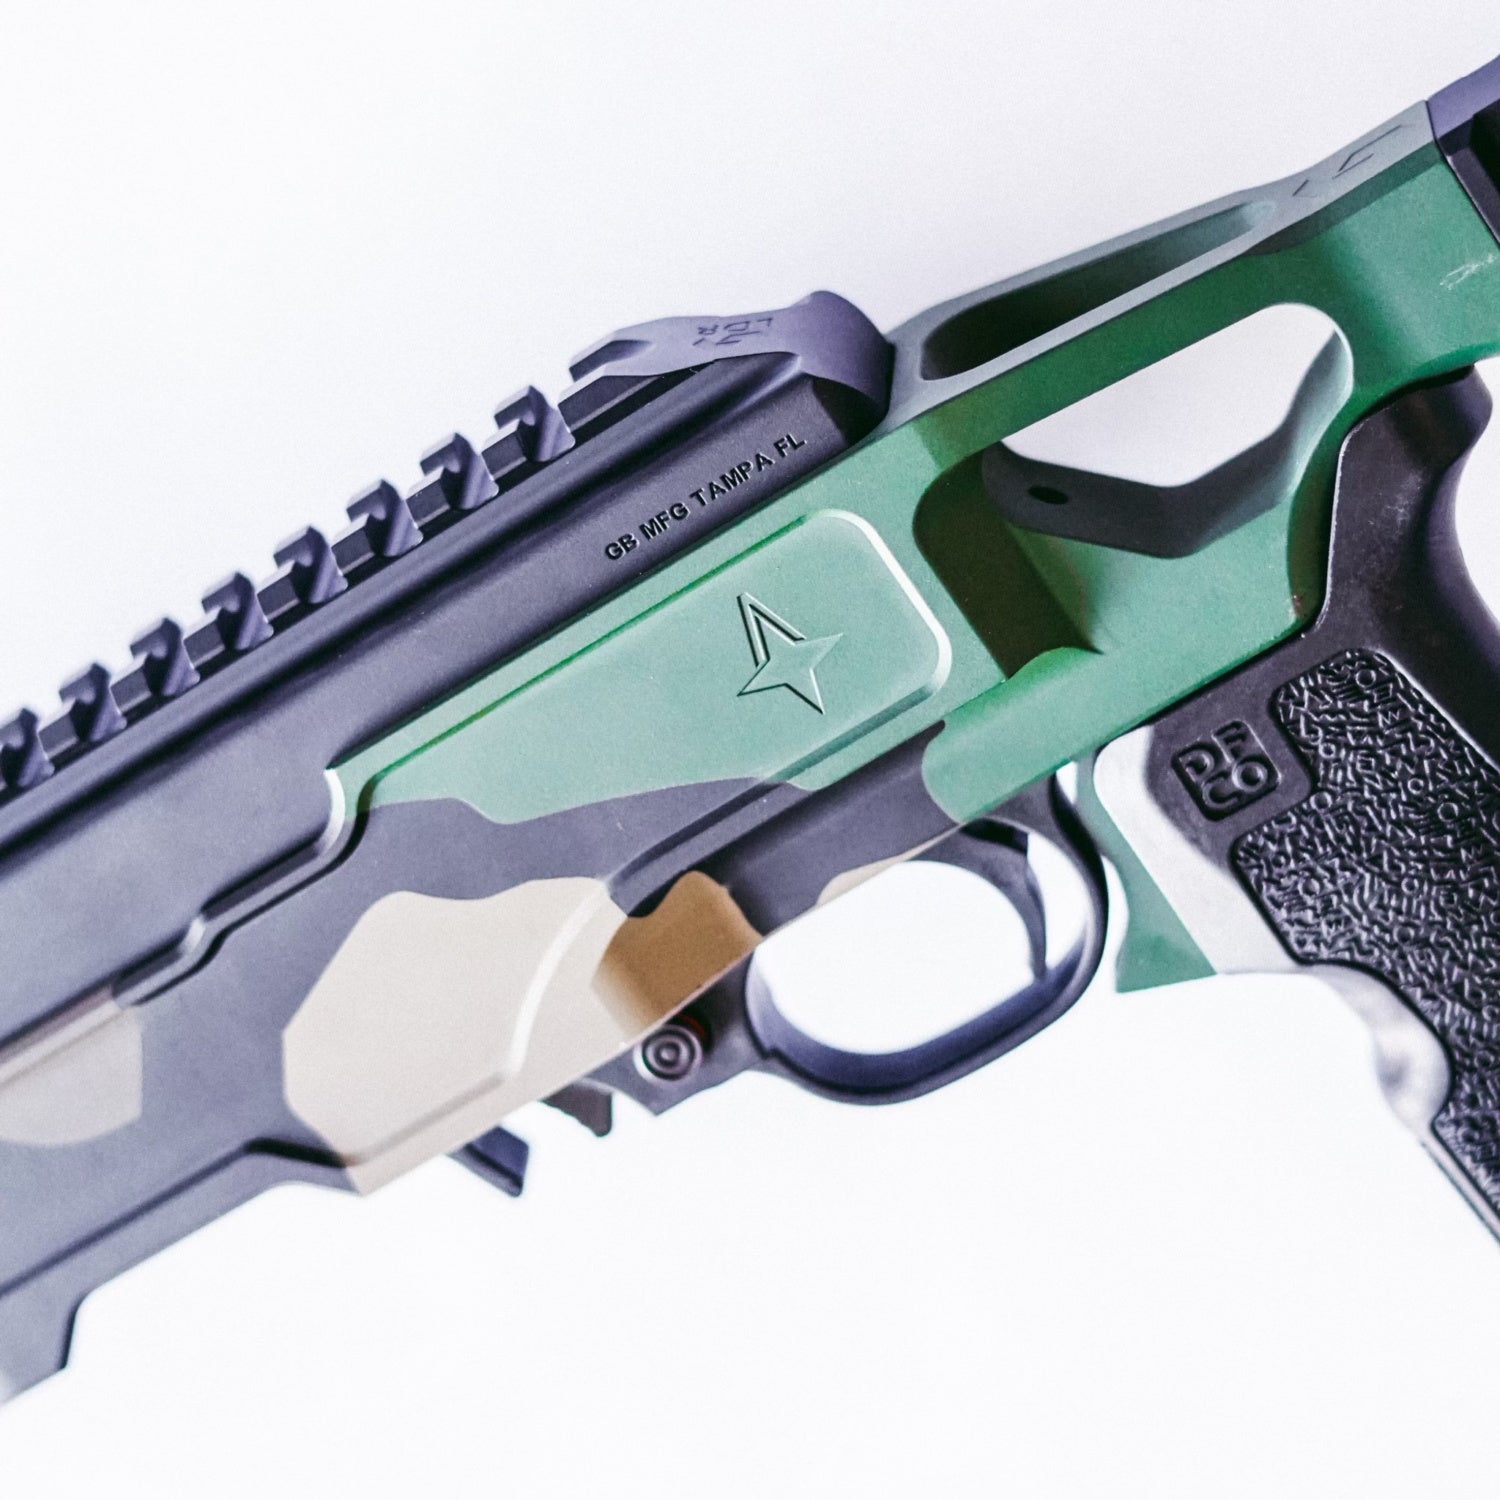 Grey Birch and ASTRA Produce Fancy Limited Run of LDR Carbon Rifles